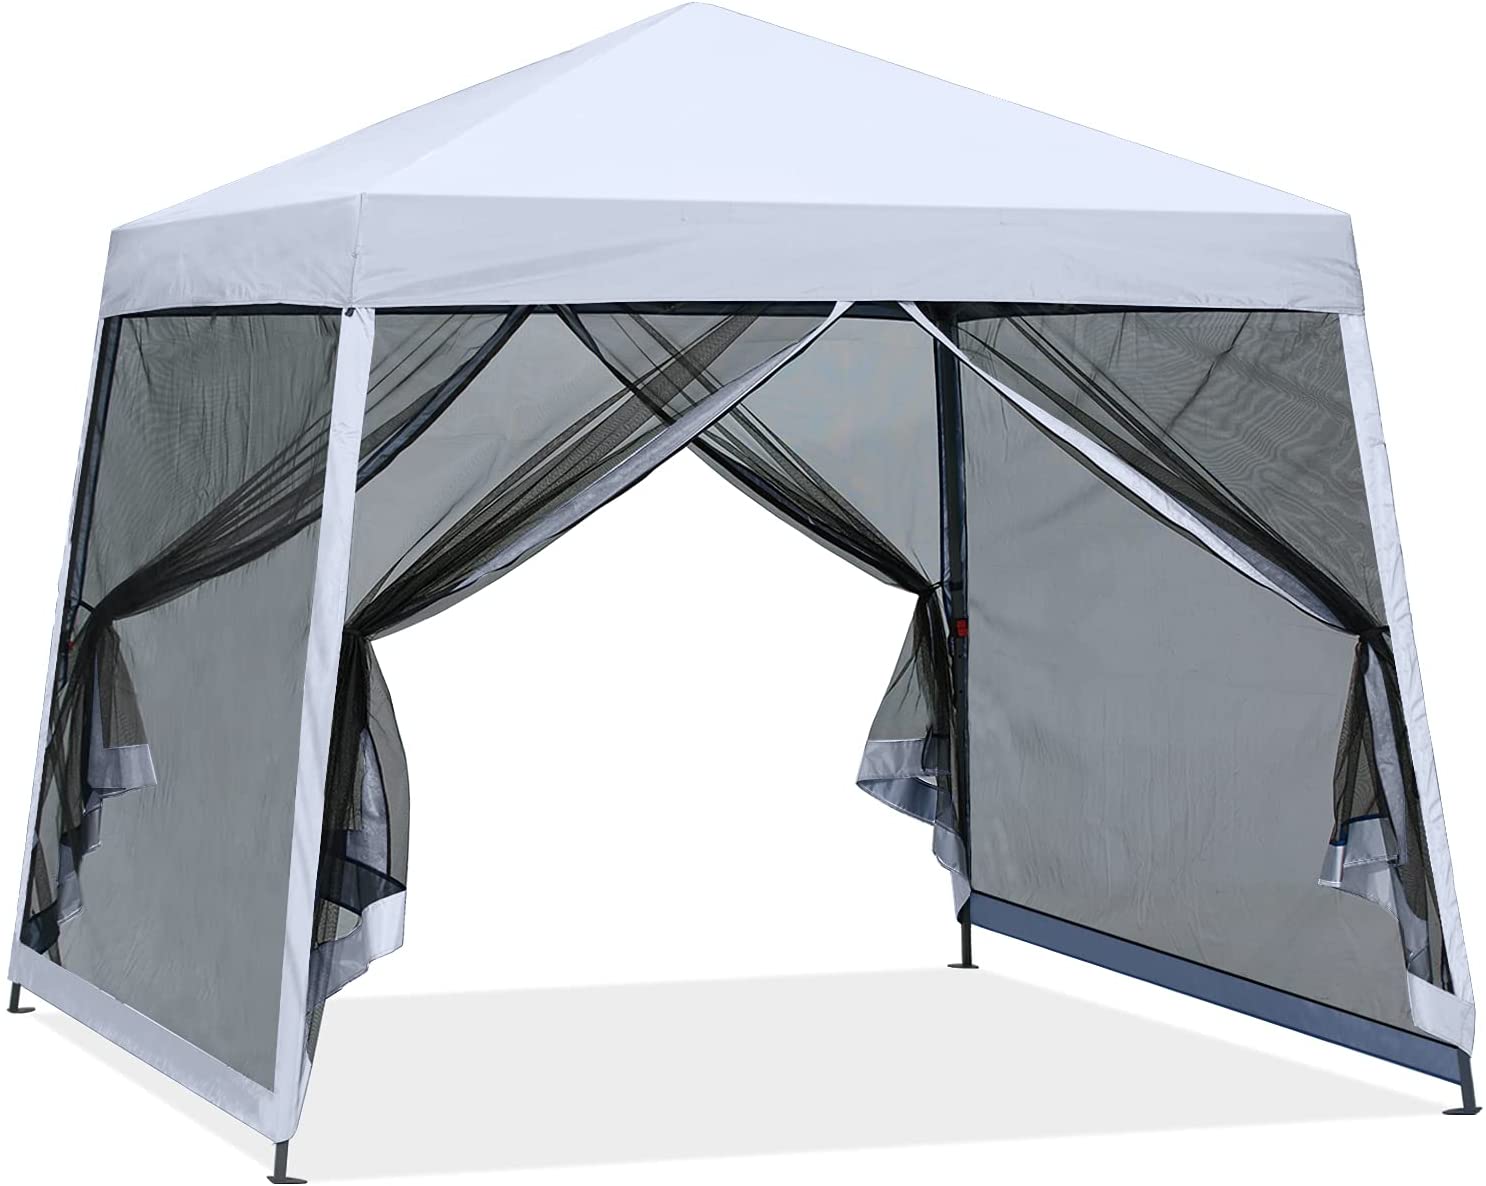 Outdoor Slant Canopy Tent with Netting Wall( 10x10 Ft / 12x12 Ft ) - ABC-CANOPY